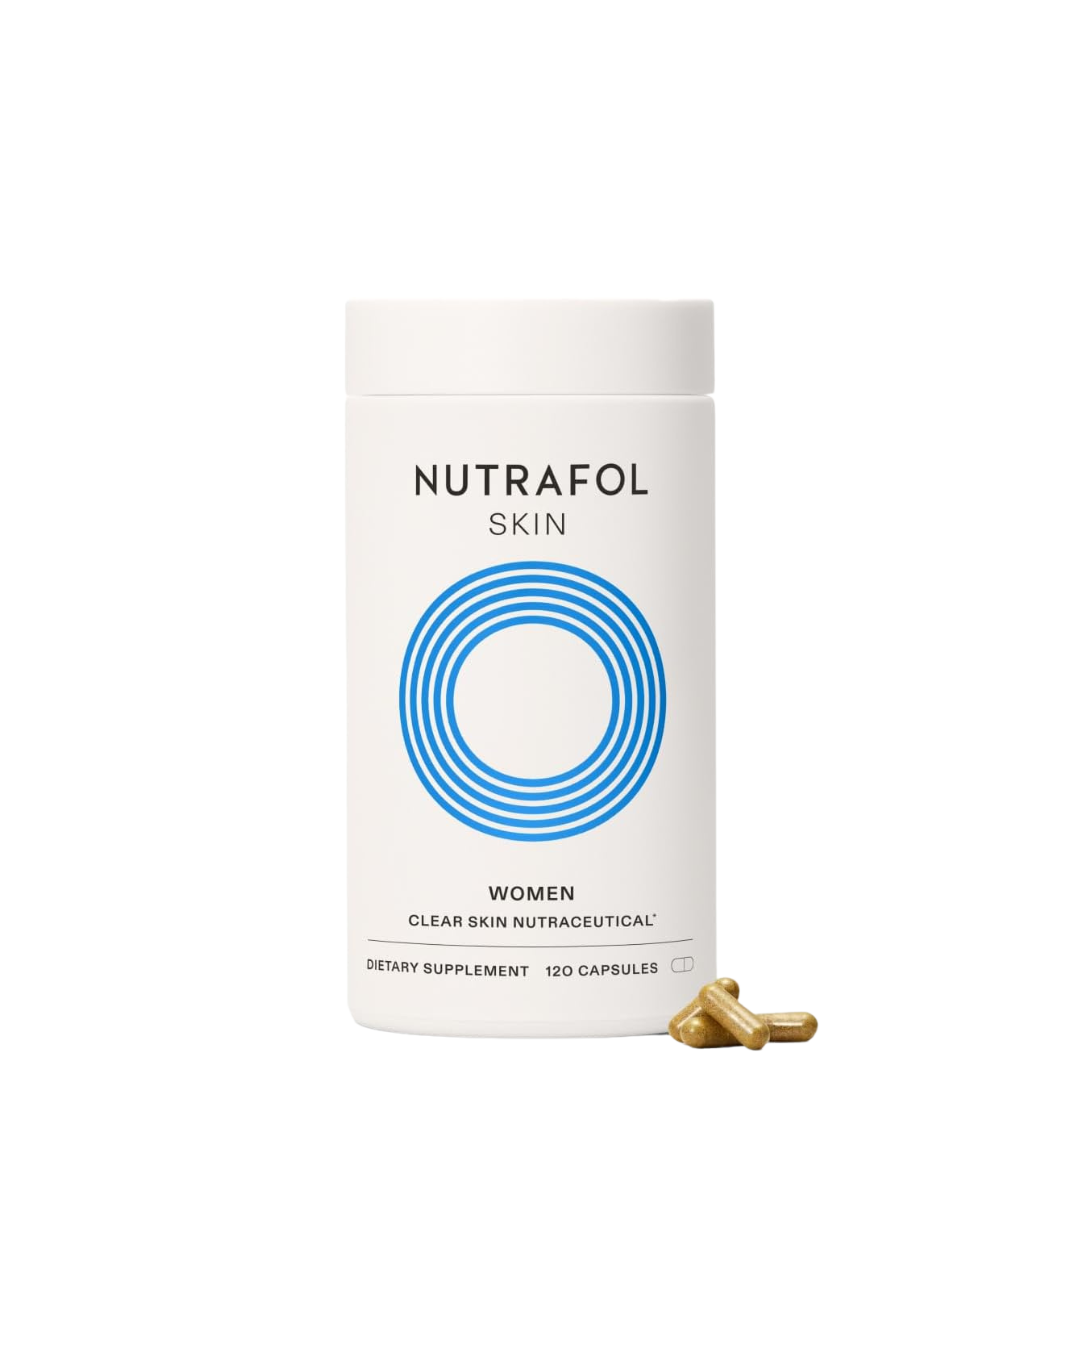 Nutrafol Skin Women Clear Skin Nutraceutical Dietary Supplement for Acne and Post-Acne Dark Spots-3 Month Supply